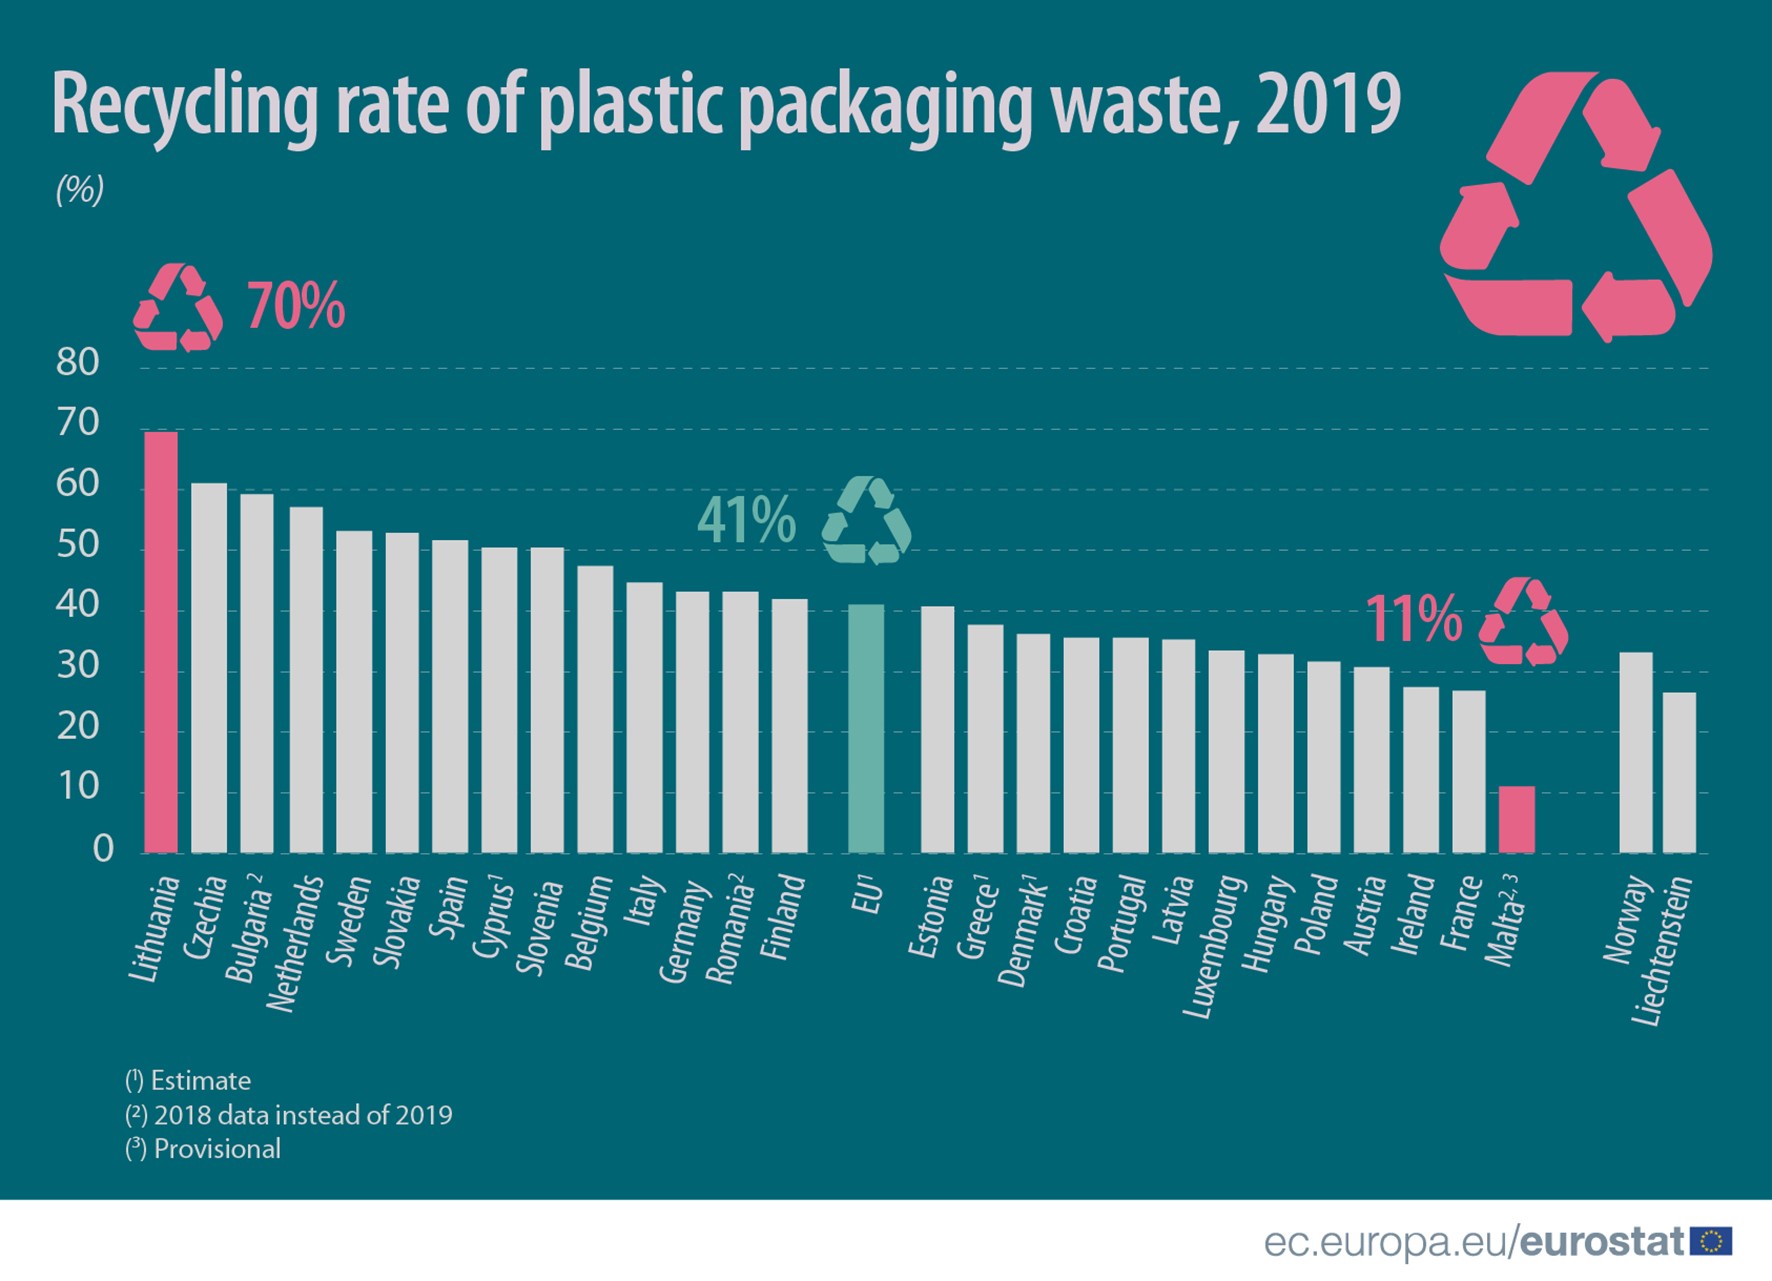 Recycling rate of plastic packaging waste, EU, EU Member States and EFTA countries, 2019, %